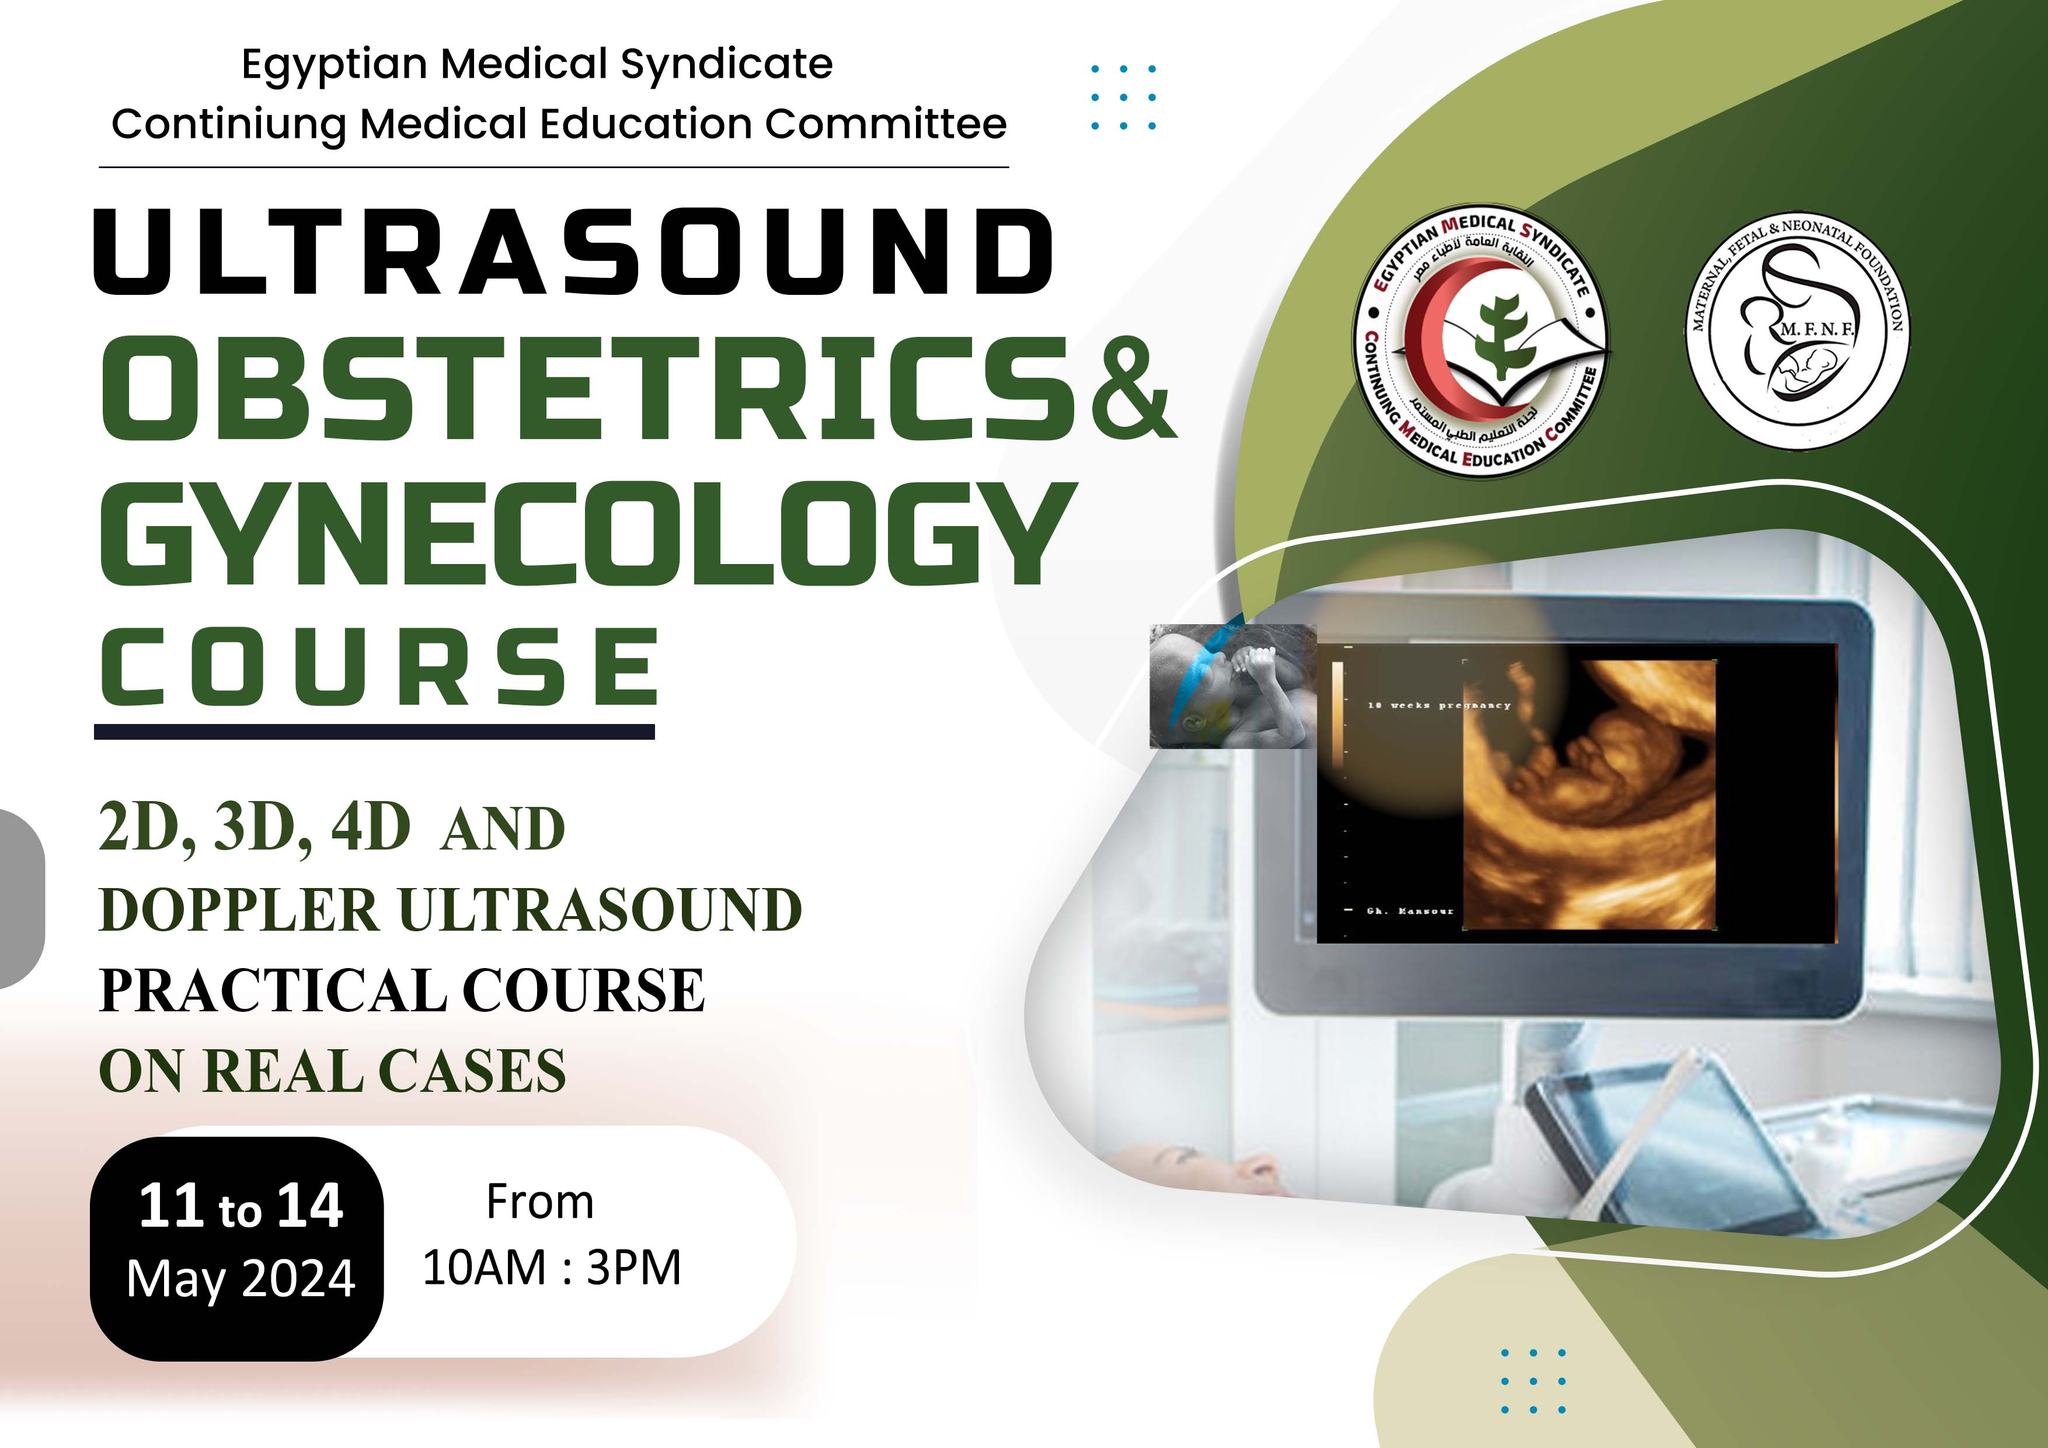 Ultrasound Obstetrics and Gynecology course